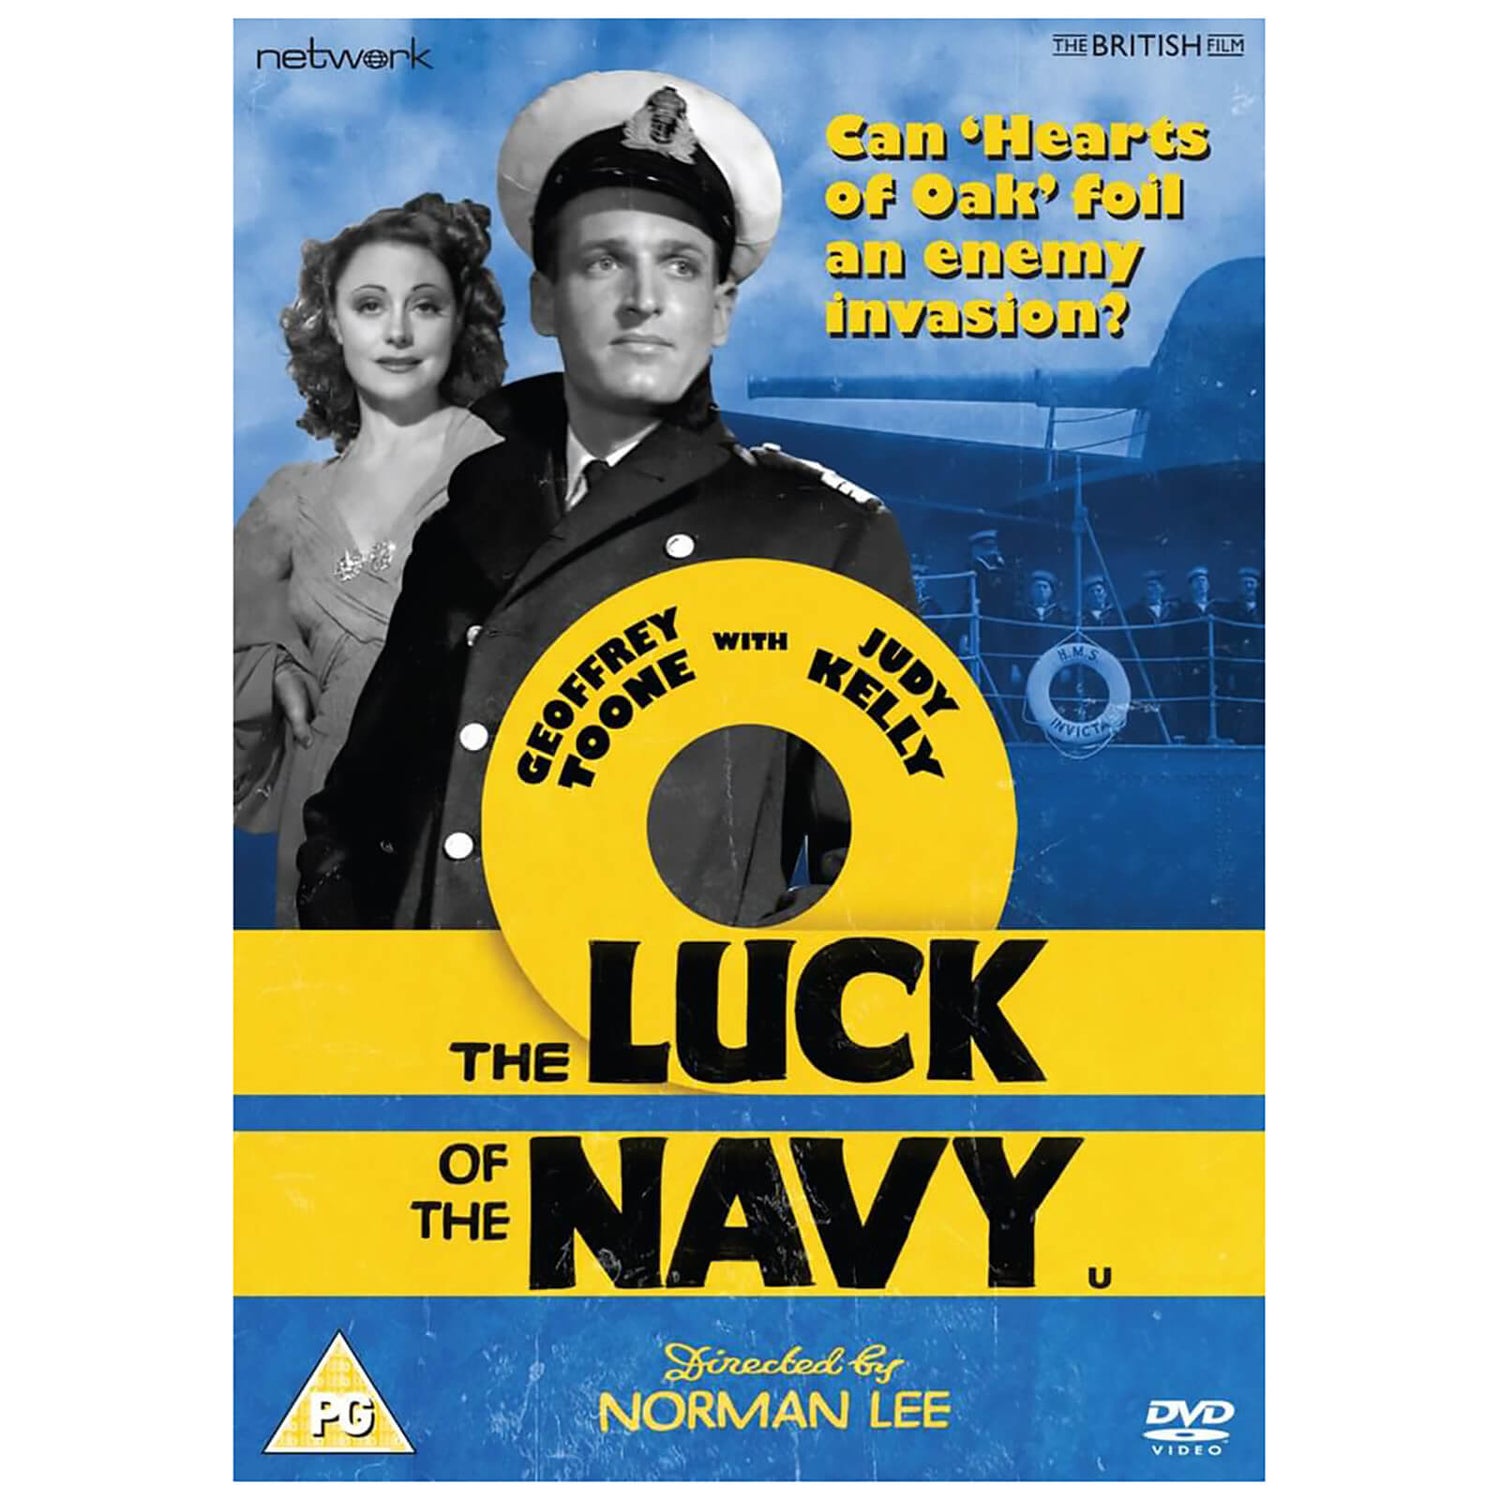 Luck of the Navy